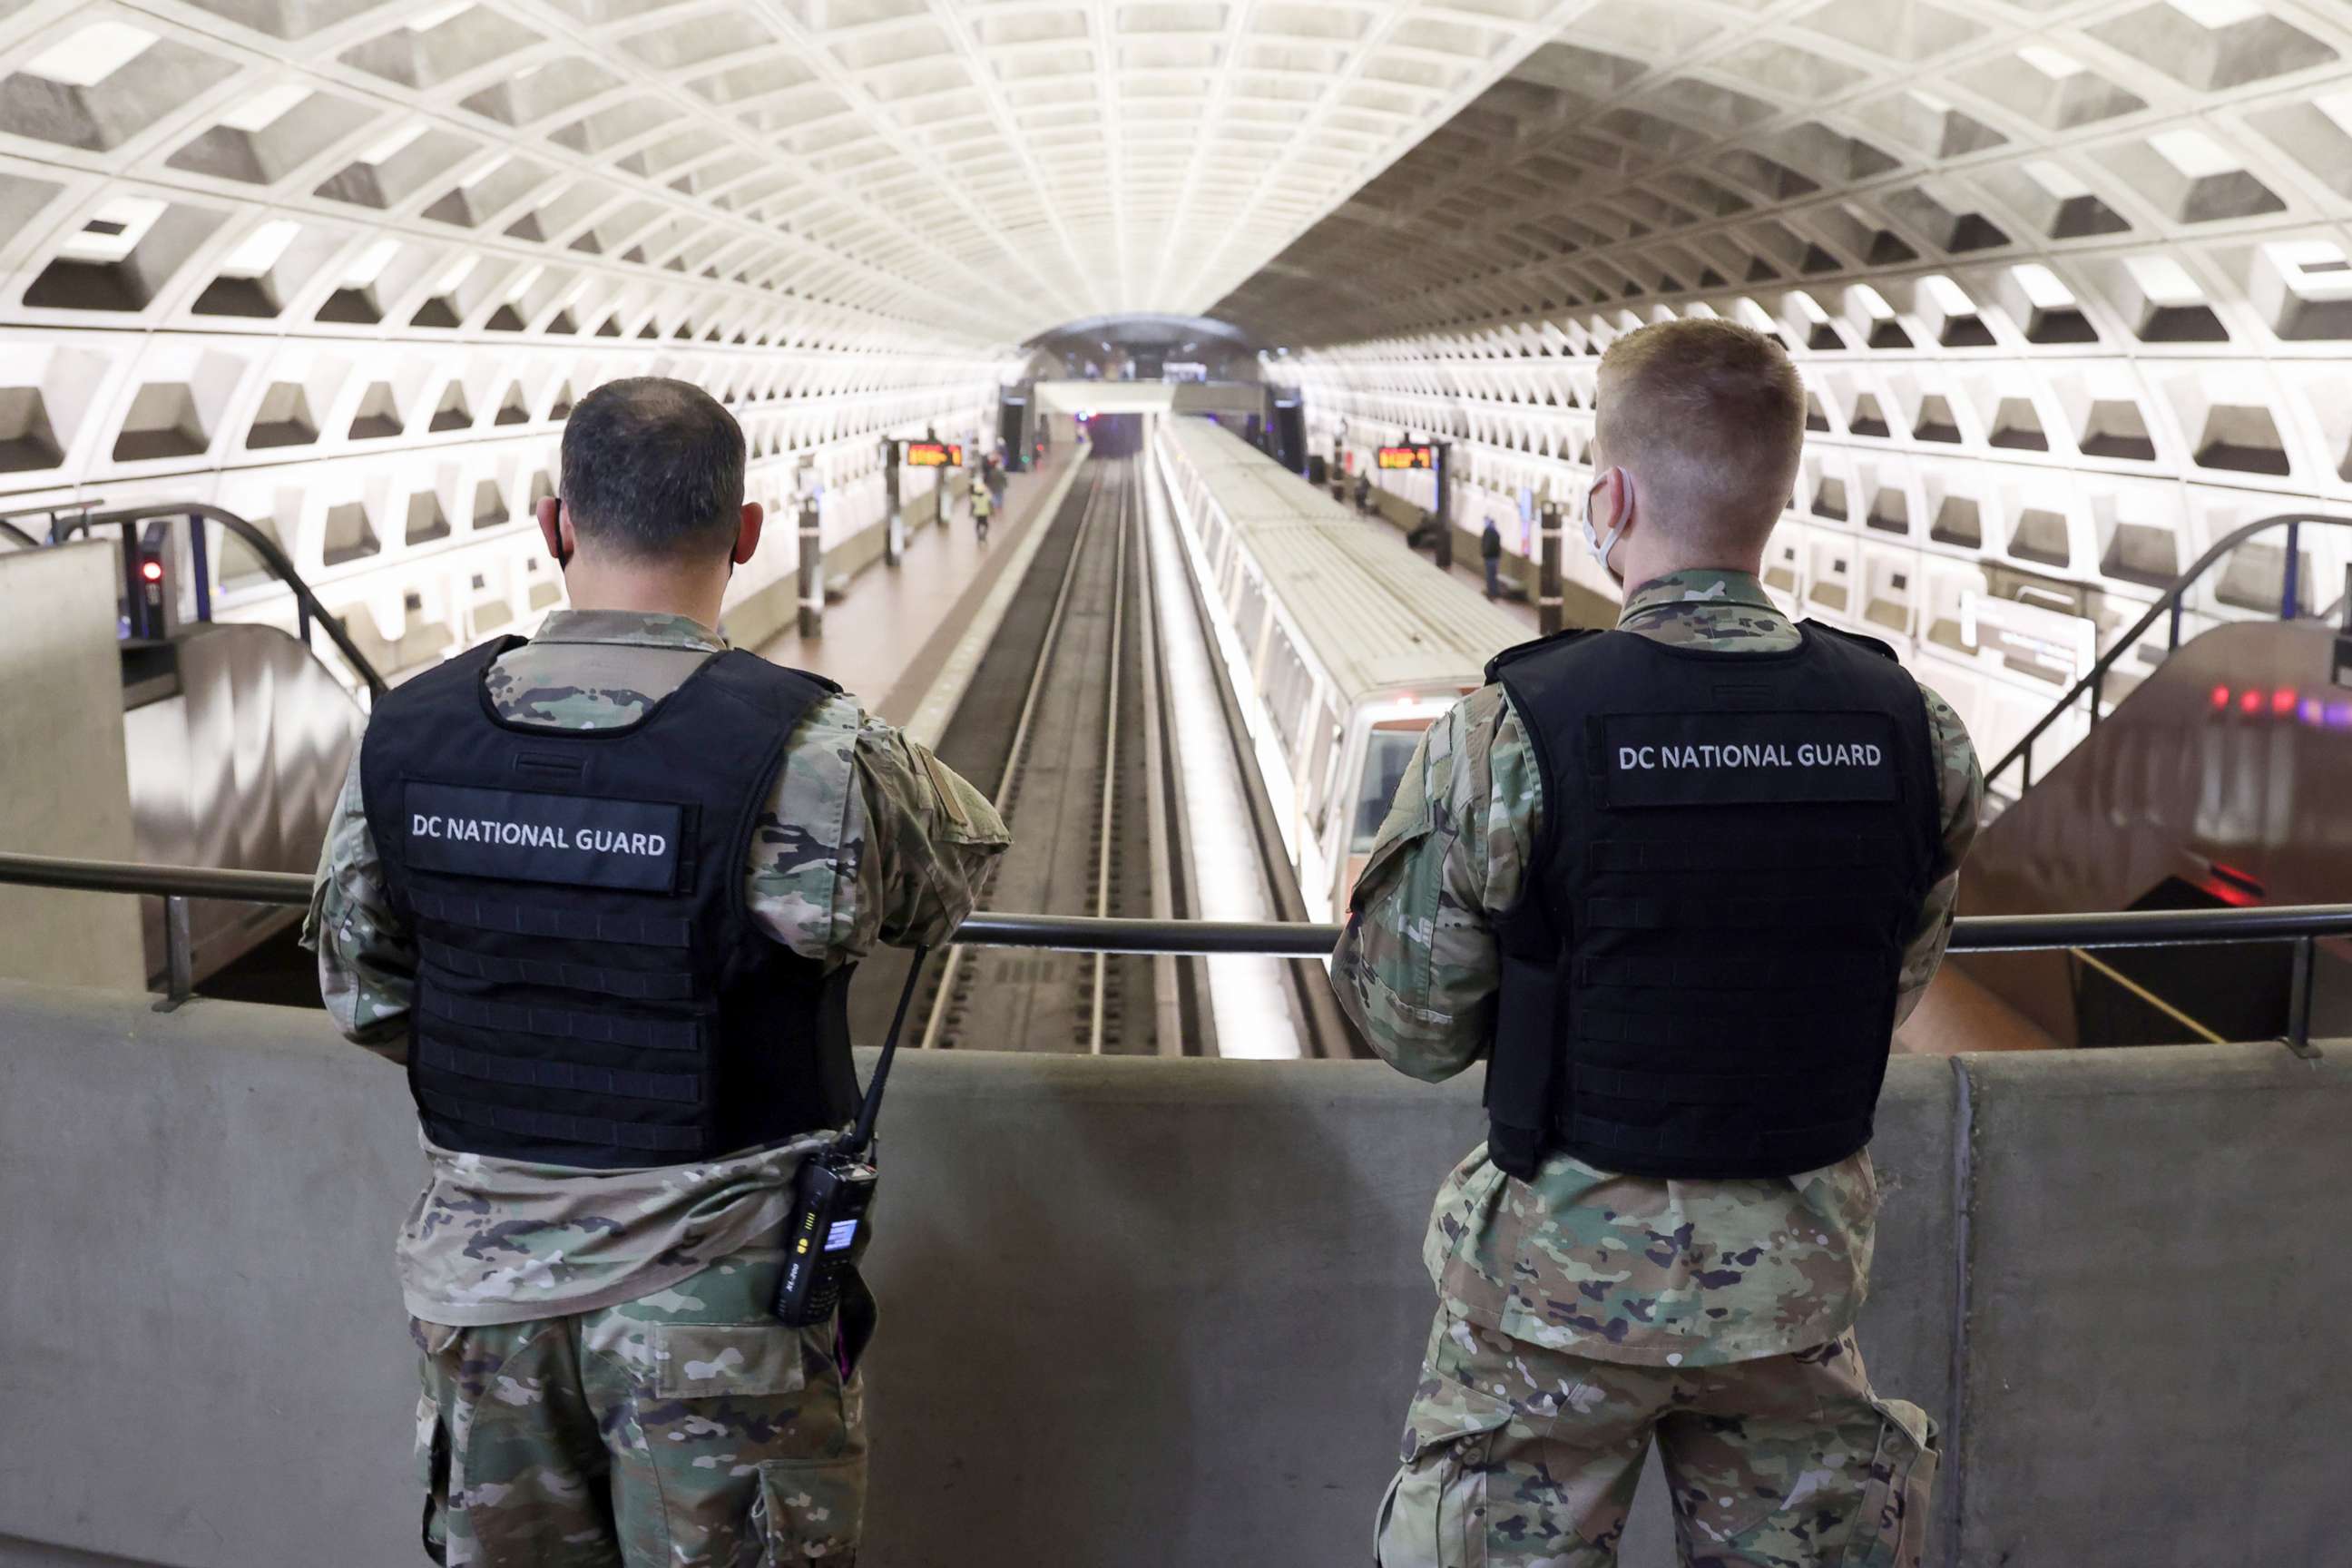 PHOTO: National Guard soldiers keep watch in the Metro subway station as Pro-Trump demonstrators rally to protest the results of the election, Washington, Jan. 5, 2021.  